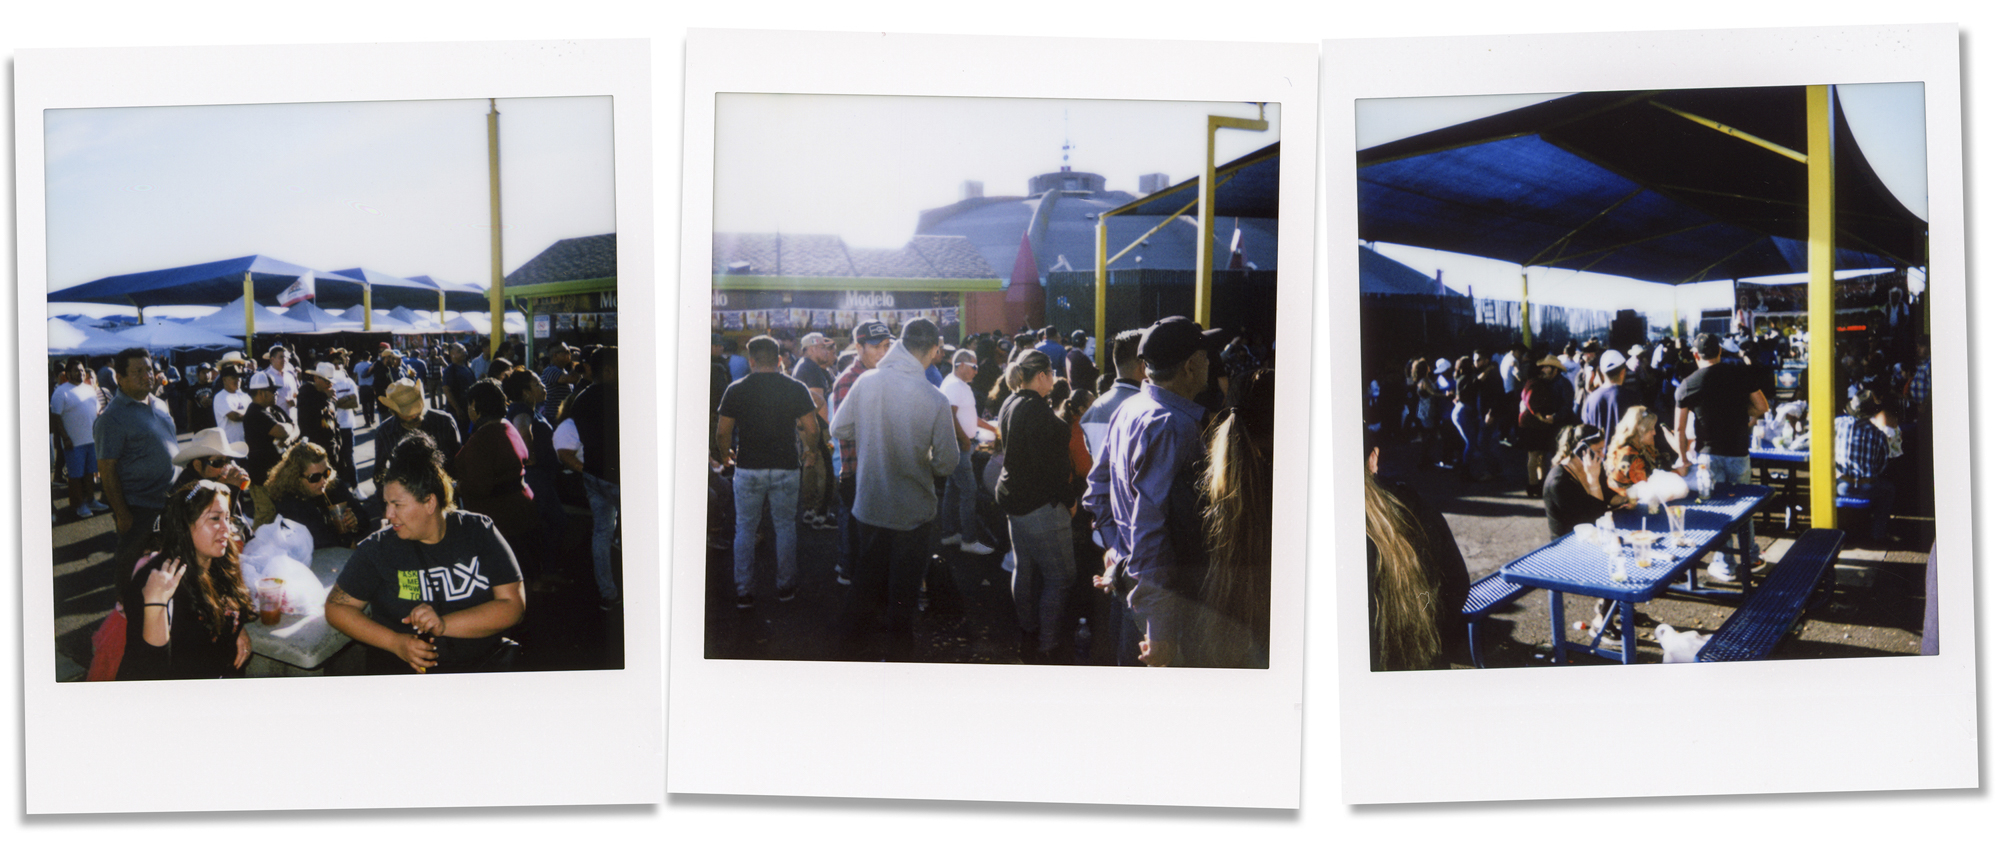 Three photos showing a large crowd in an outdoor setting.